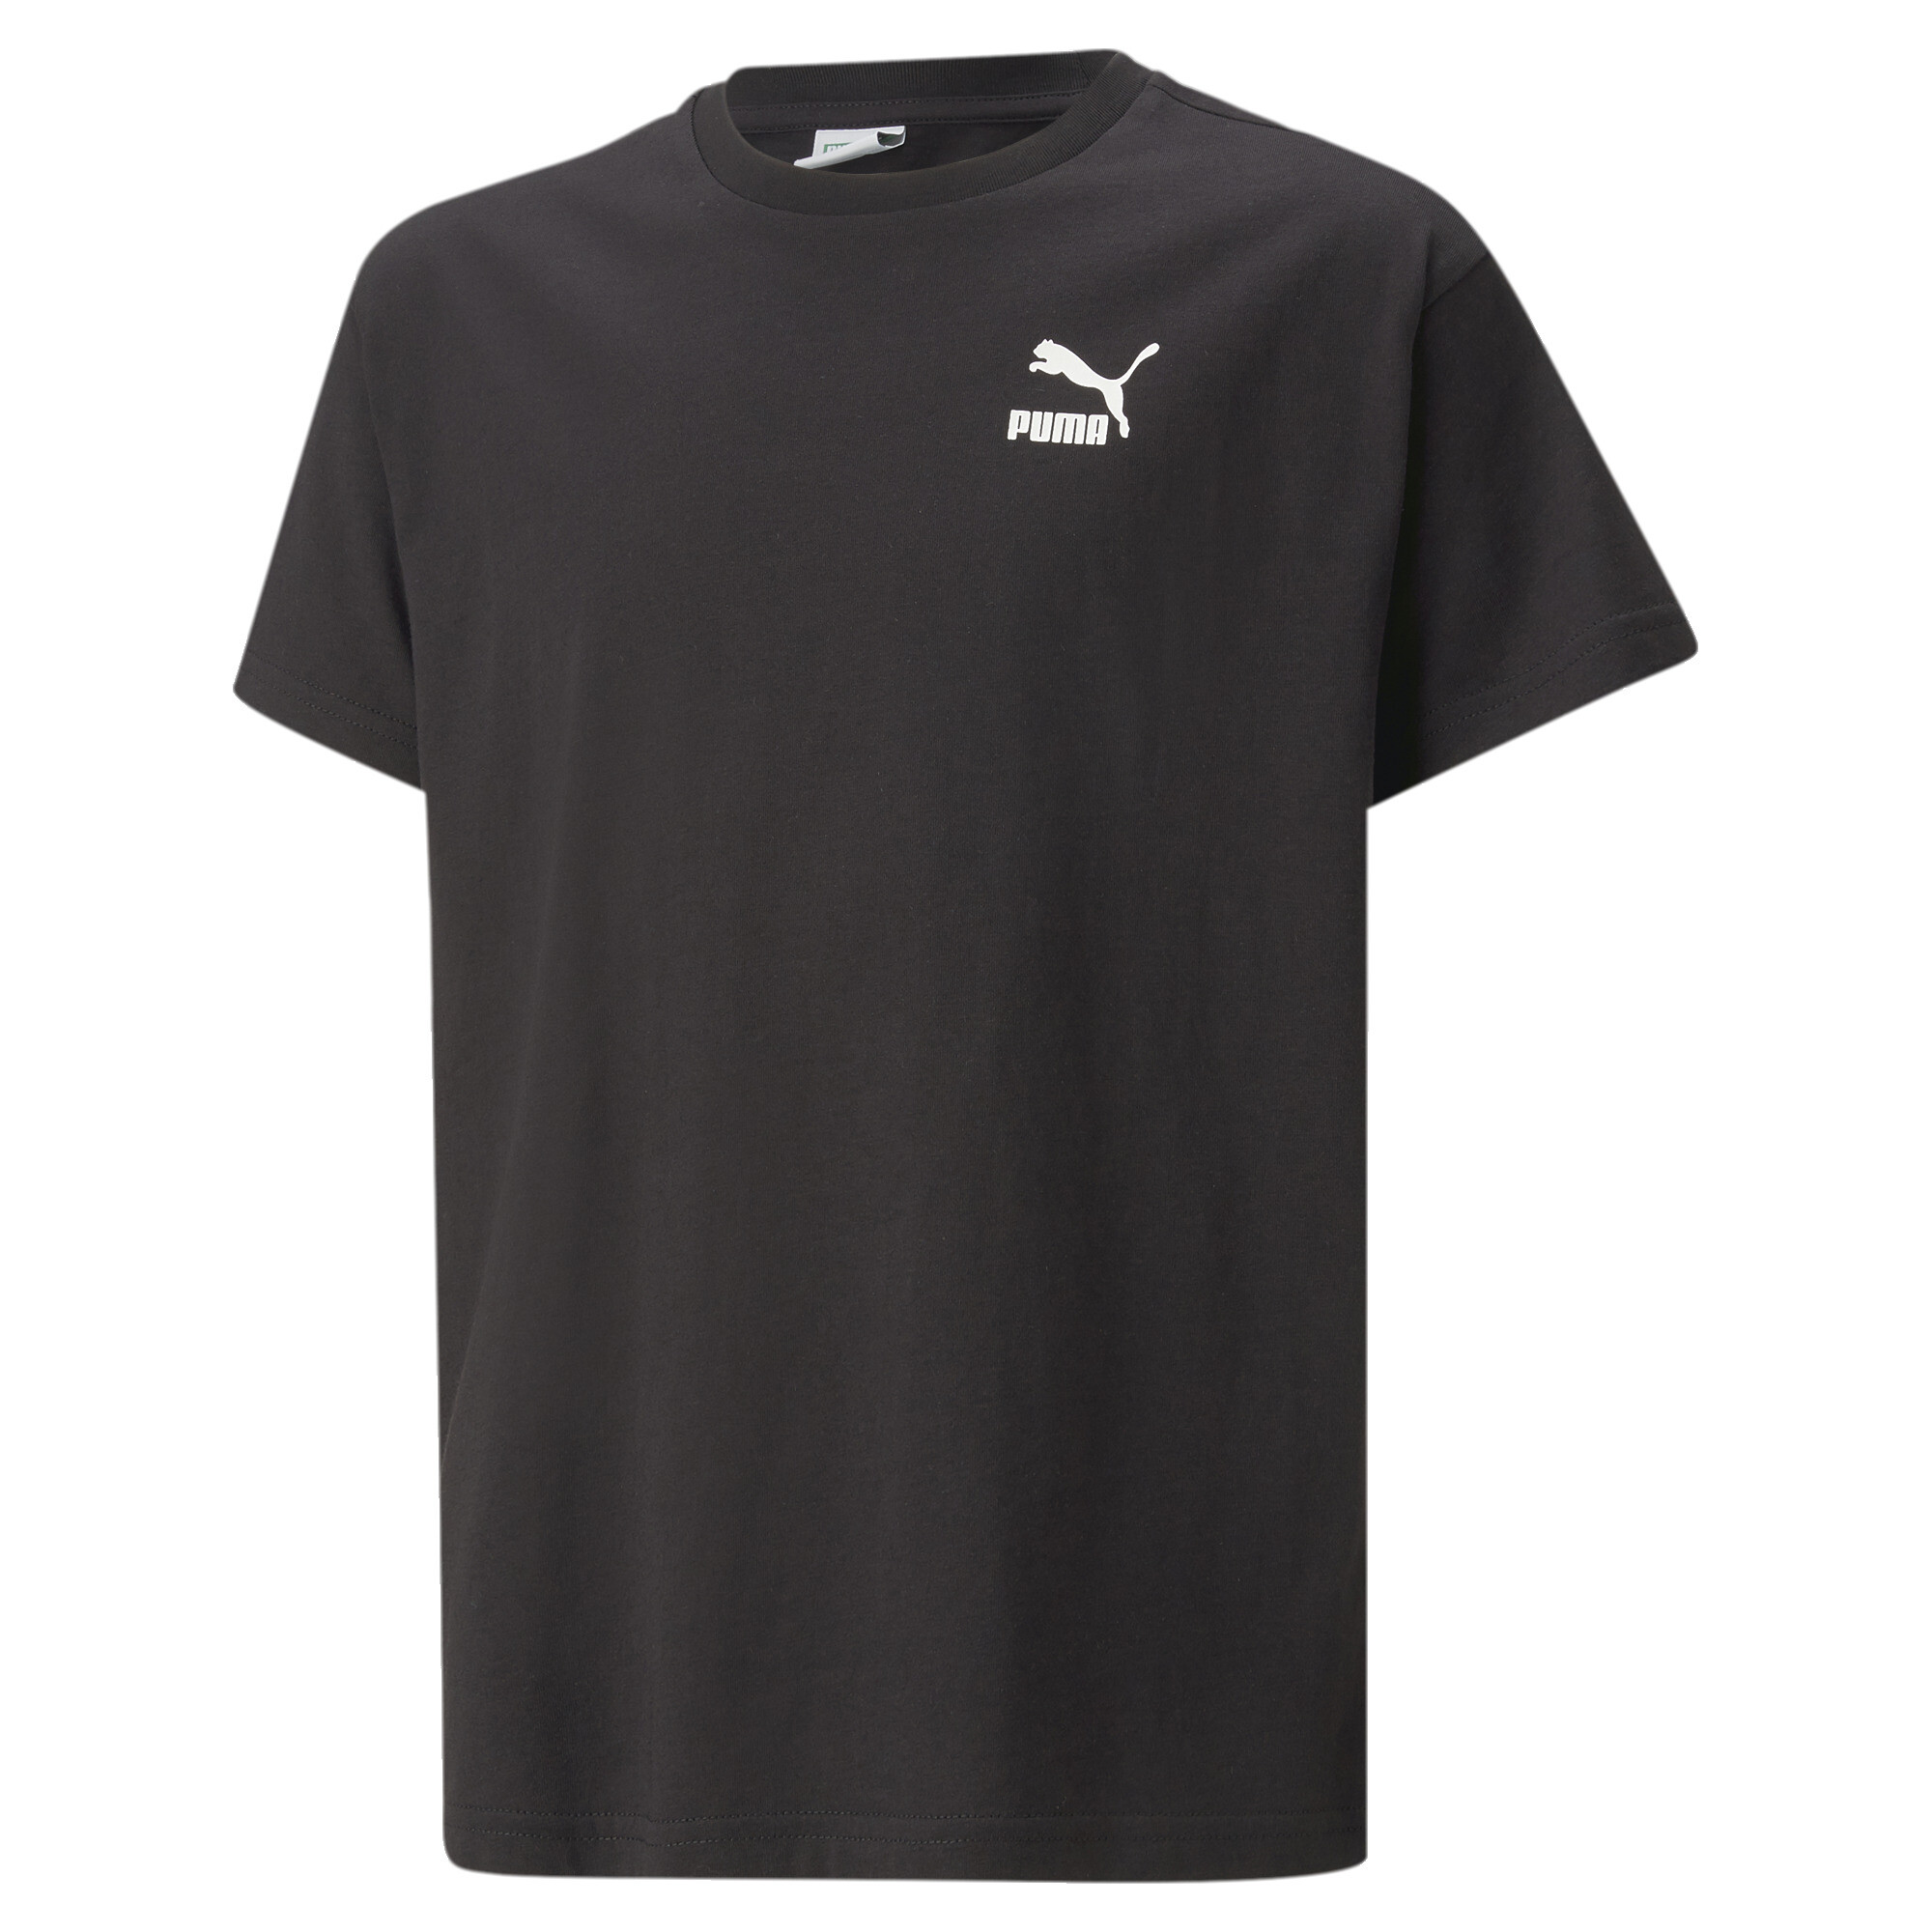 Puma Classics Relaxed Tee Youth, Black, Size 15-16Y, Age